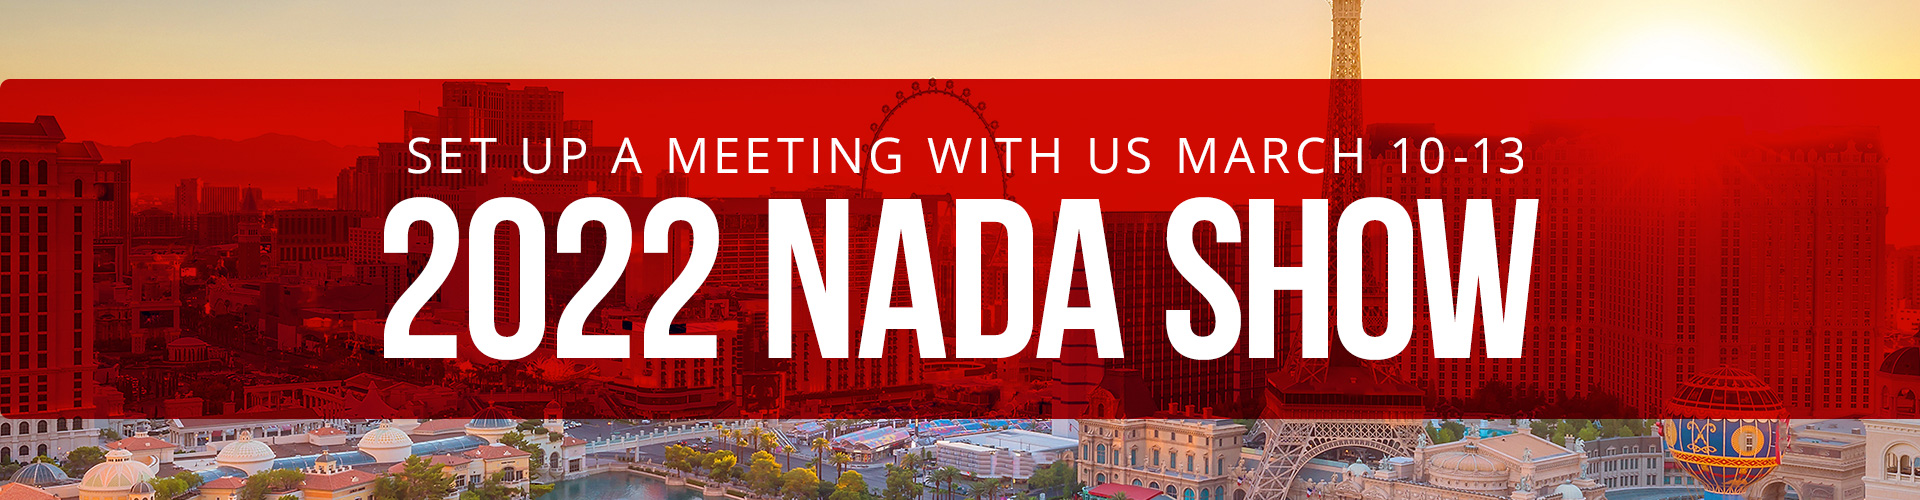 Set up a meeting with us March 10 - 13 | 2022 NADA Show